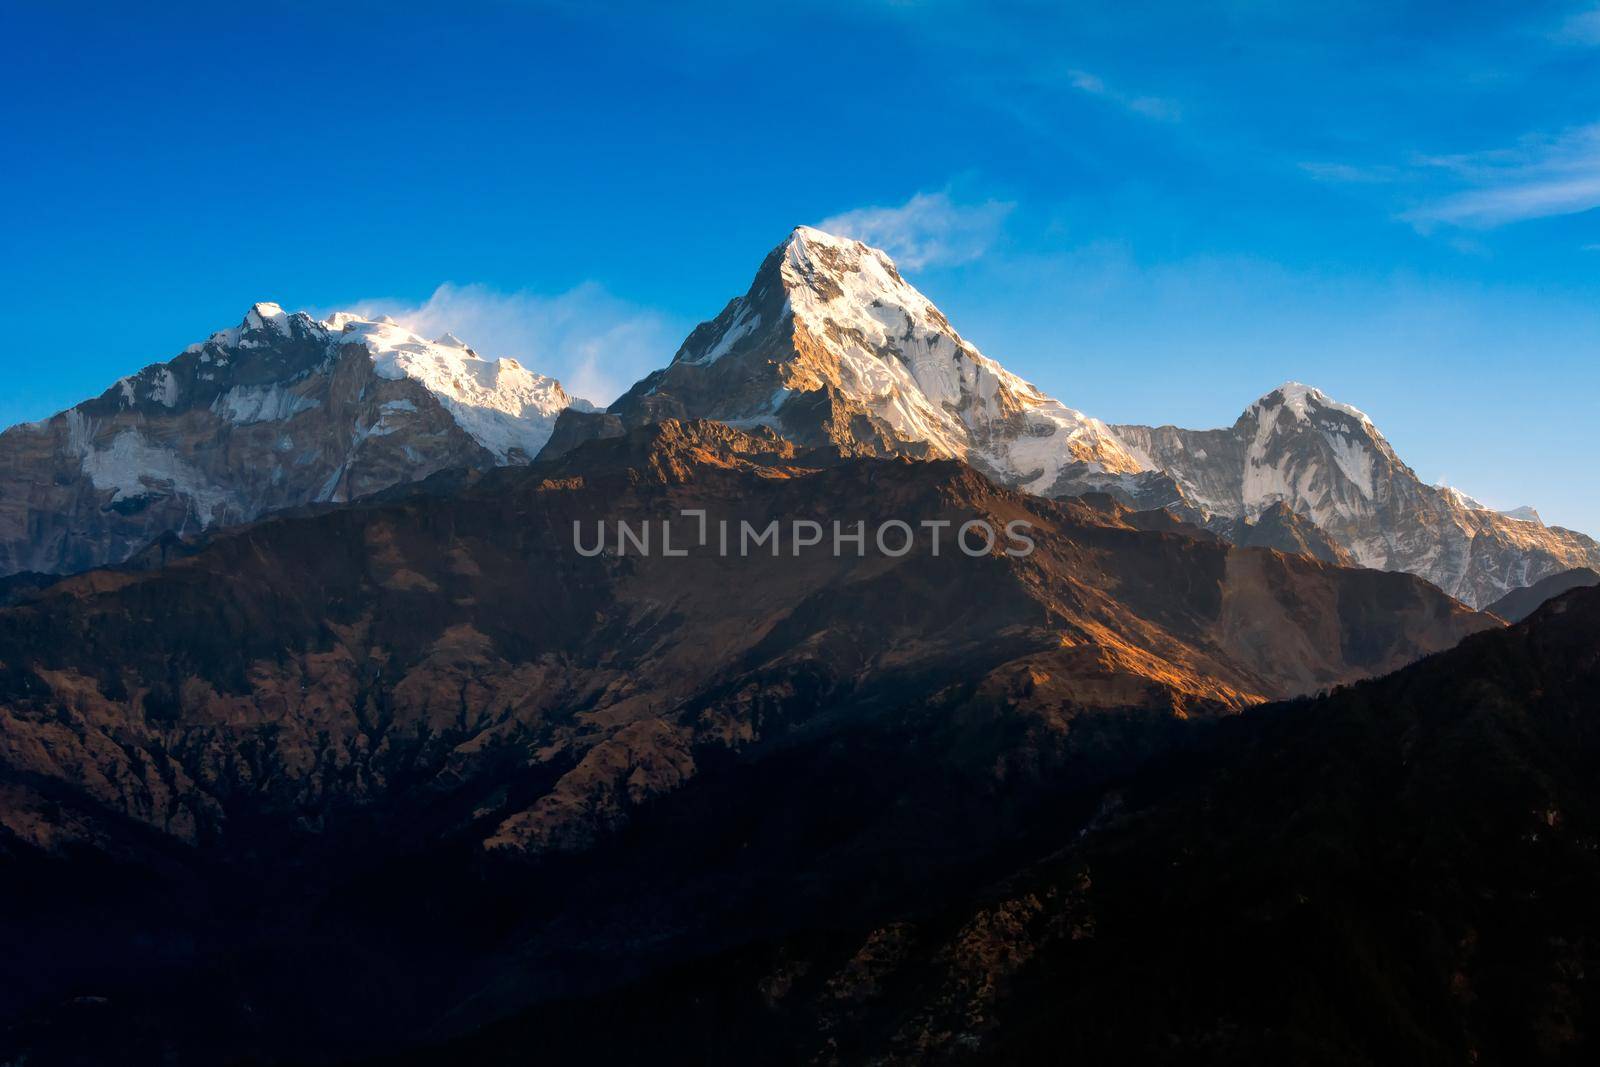 Nature view of Himalayan mountain range at Poon hill view point,Nepal. Poon hill is the famous view point in Gorepani village to see beautiful sunrise over Annapurna mountain range in Nepal by Nuamfolio